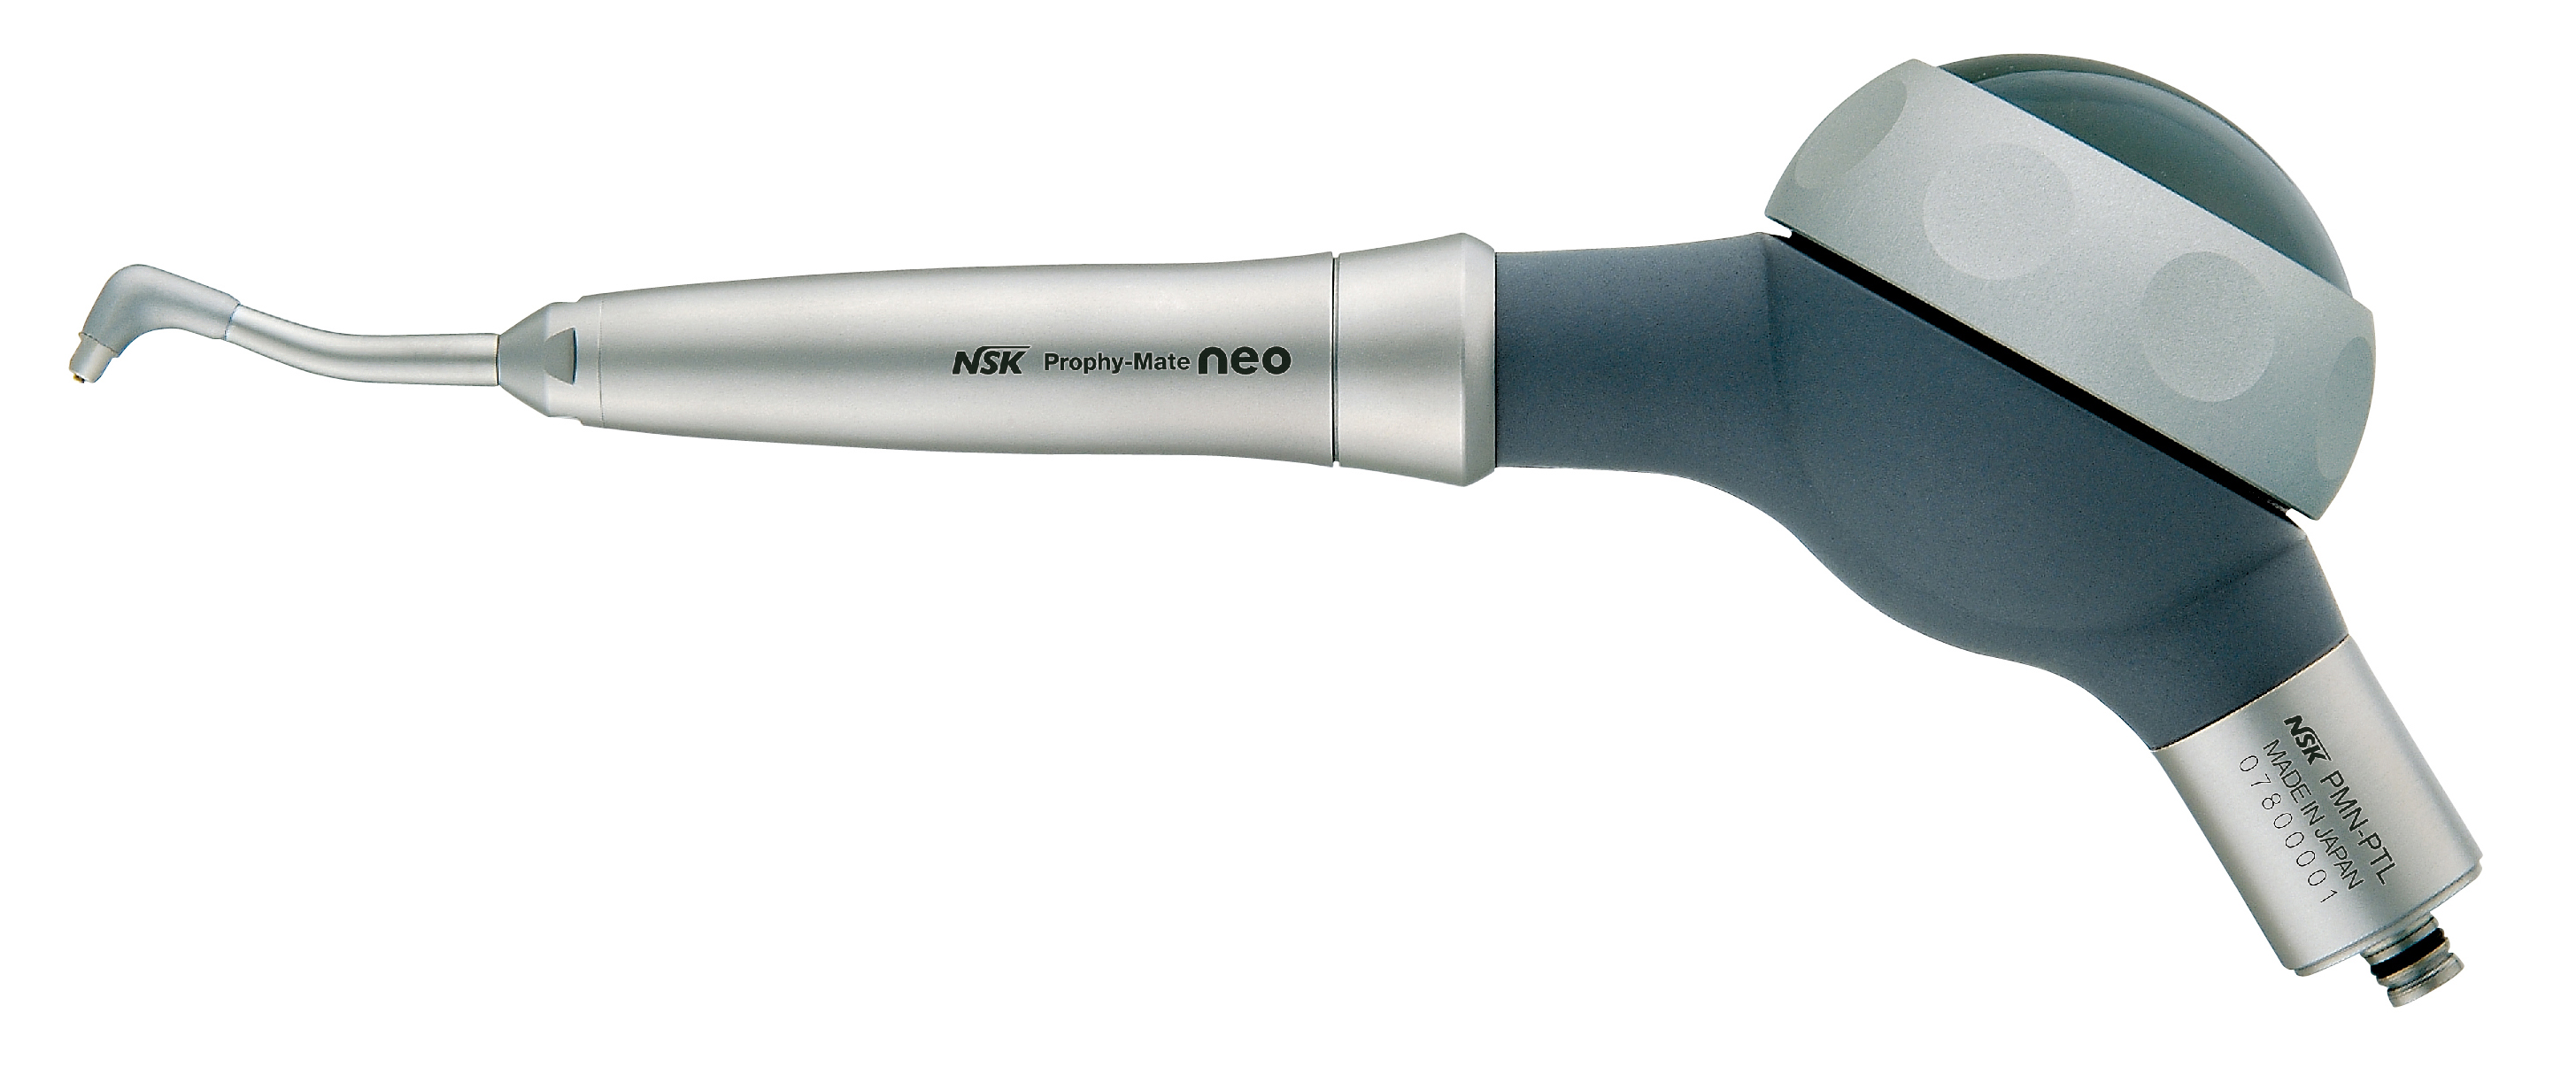 Nsk prophy mate neo